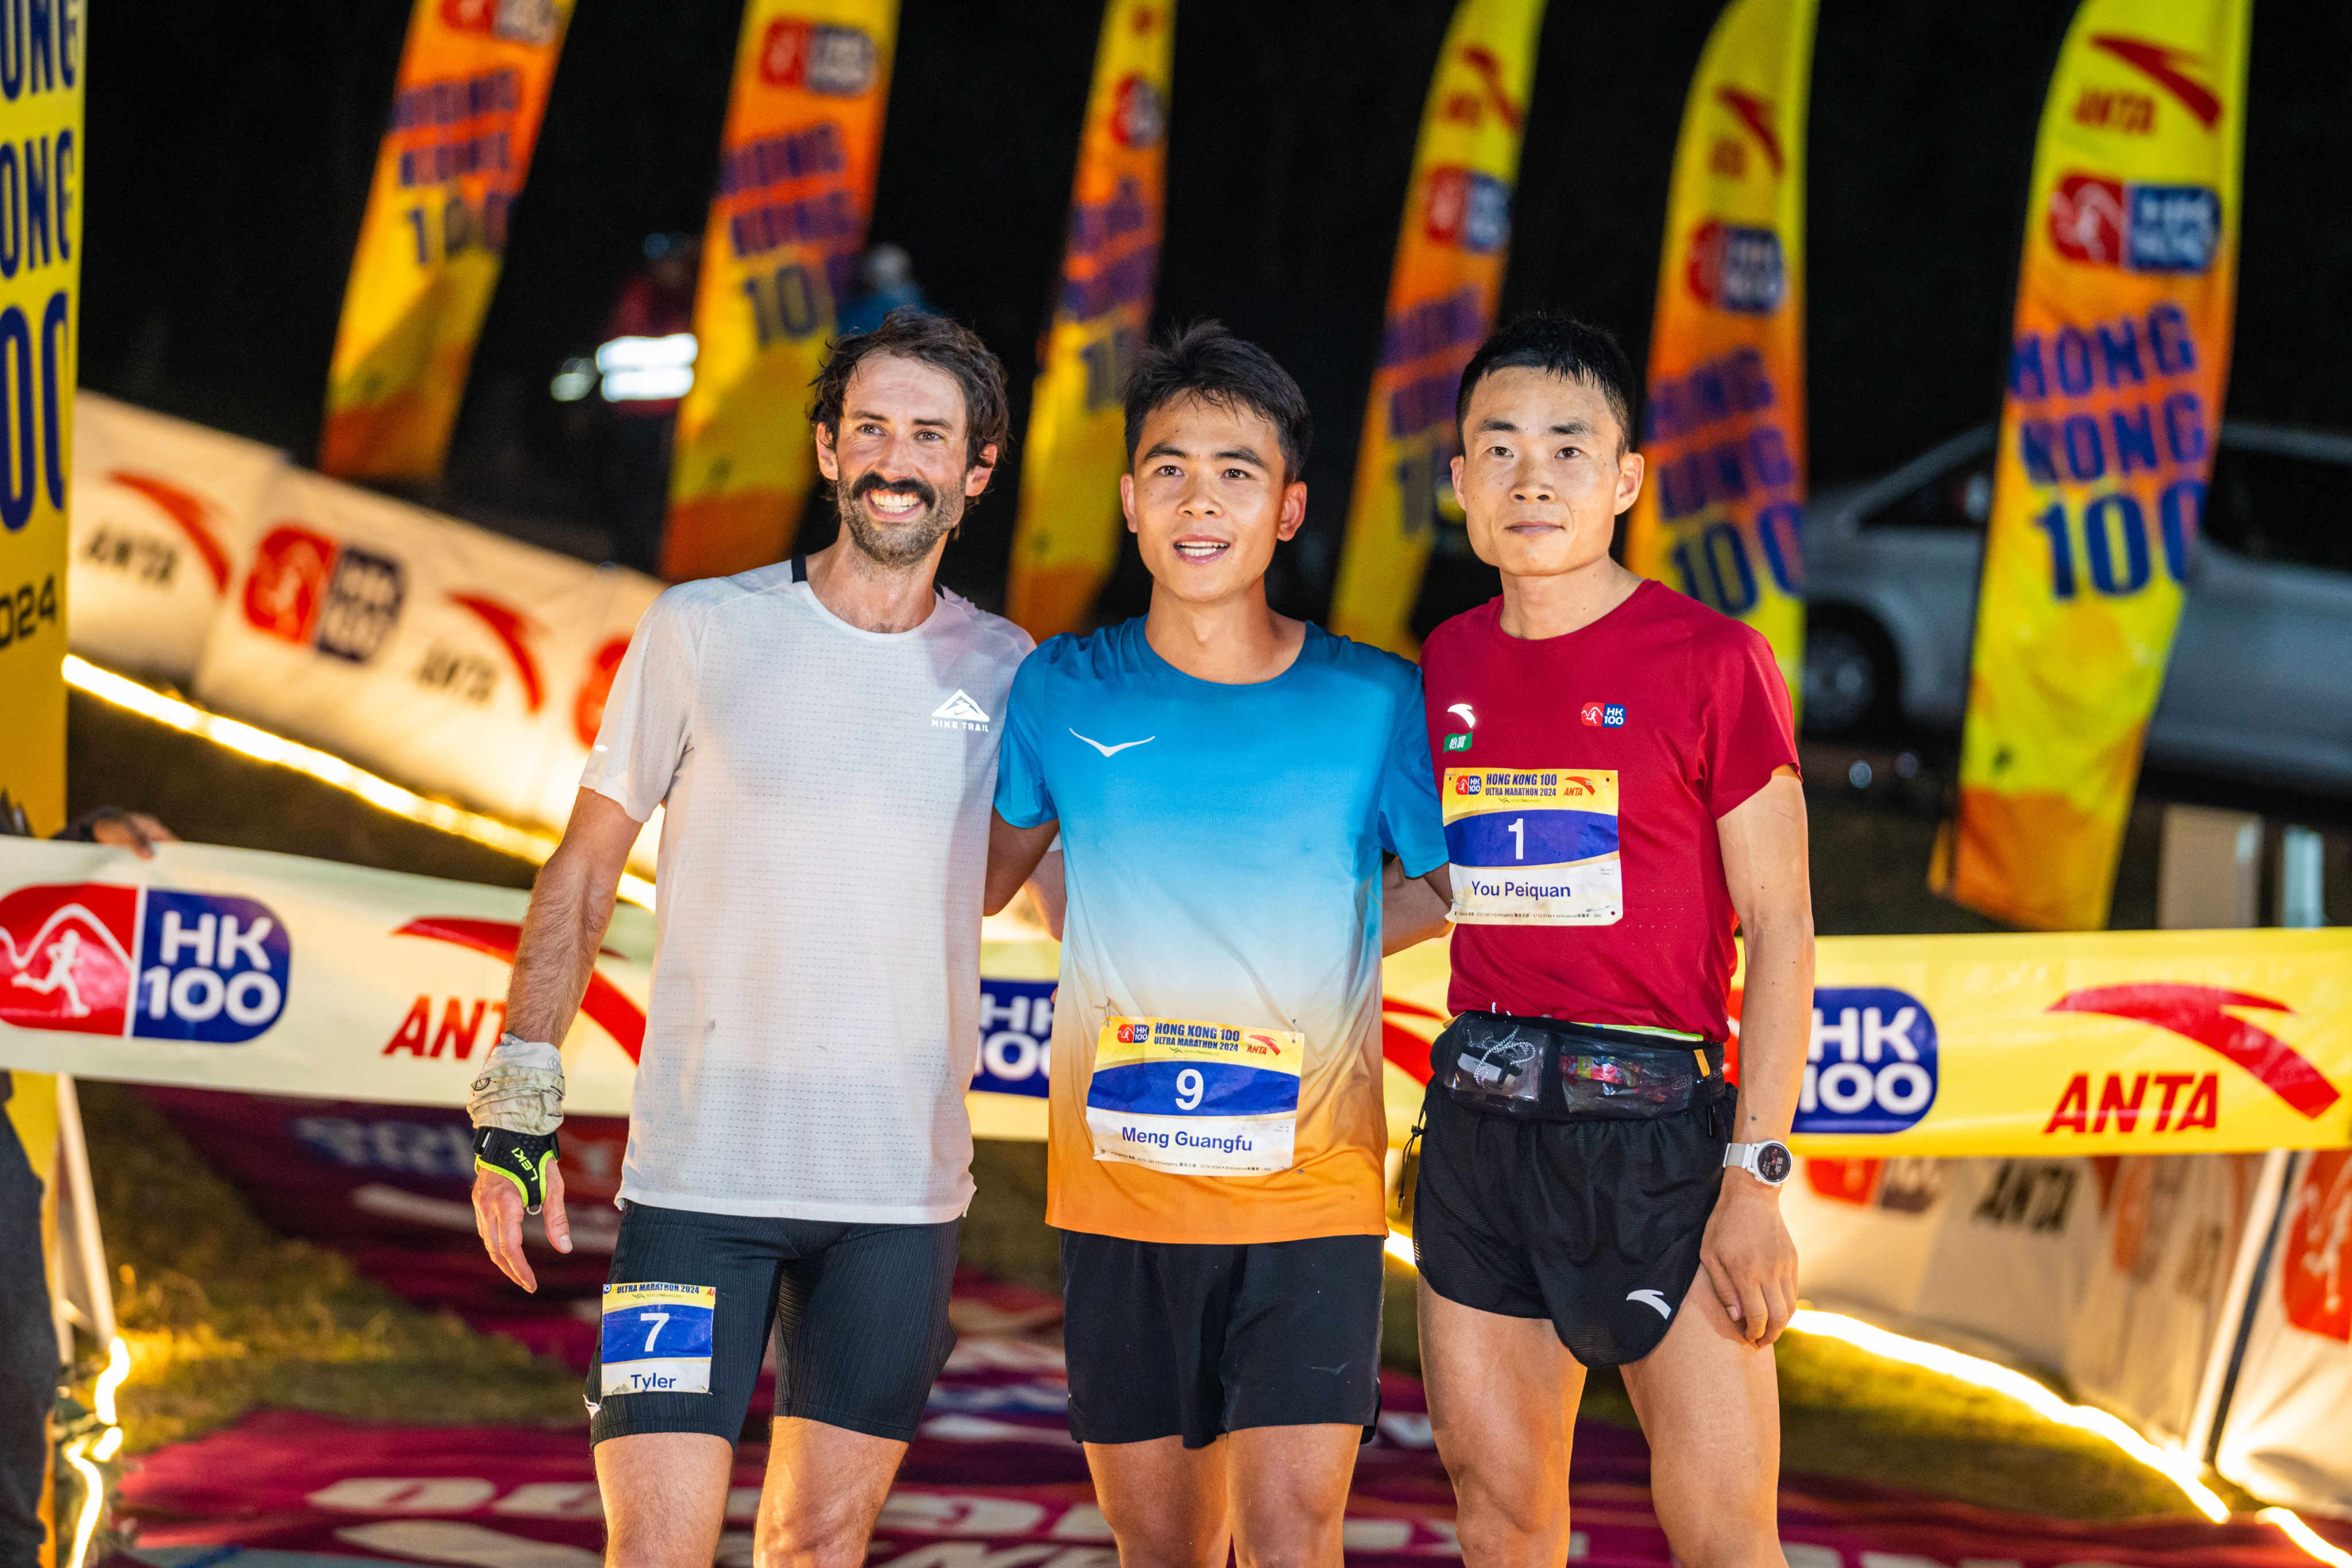 HK100 winner Meng Guangfu (centre) flanked by Tyler Green (left) and You Peiquan. Photo: Anta Brand